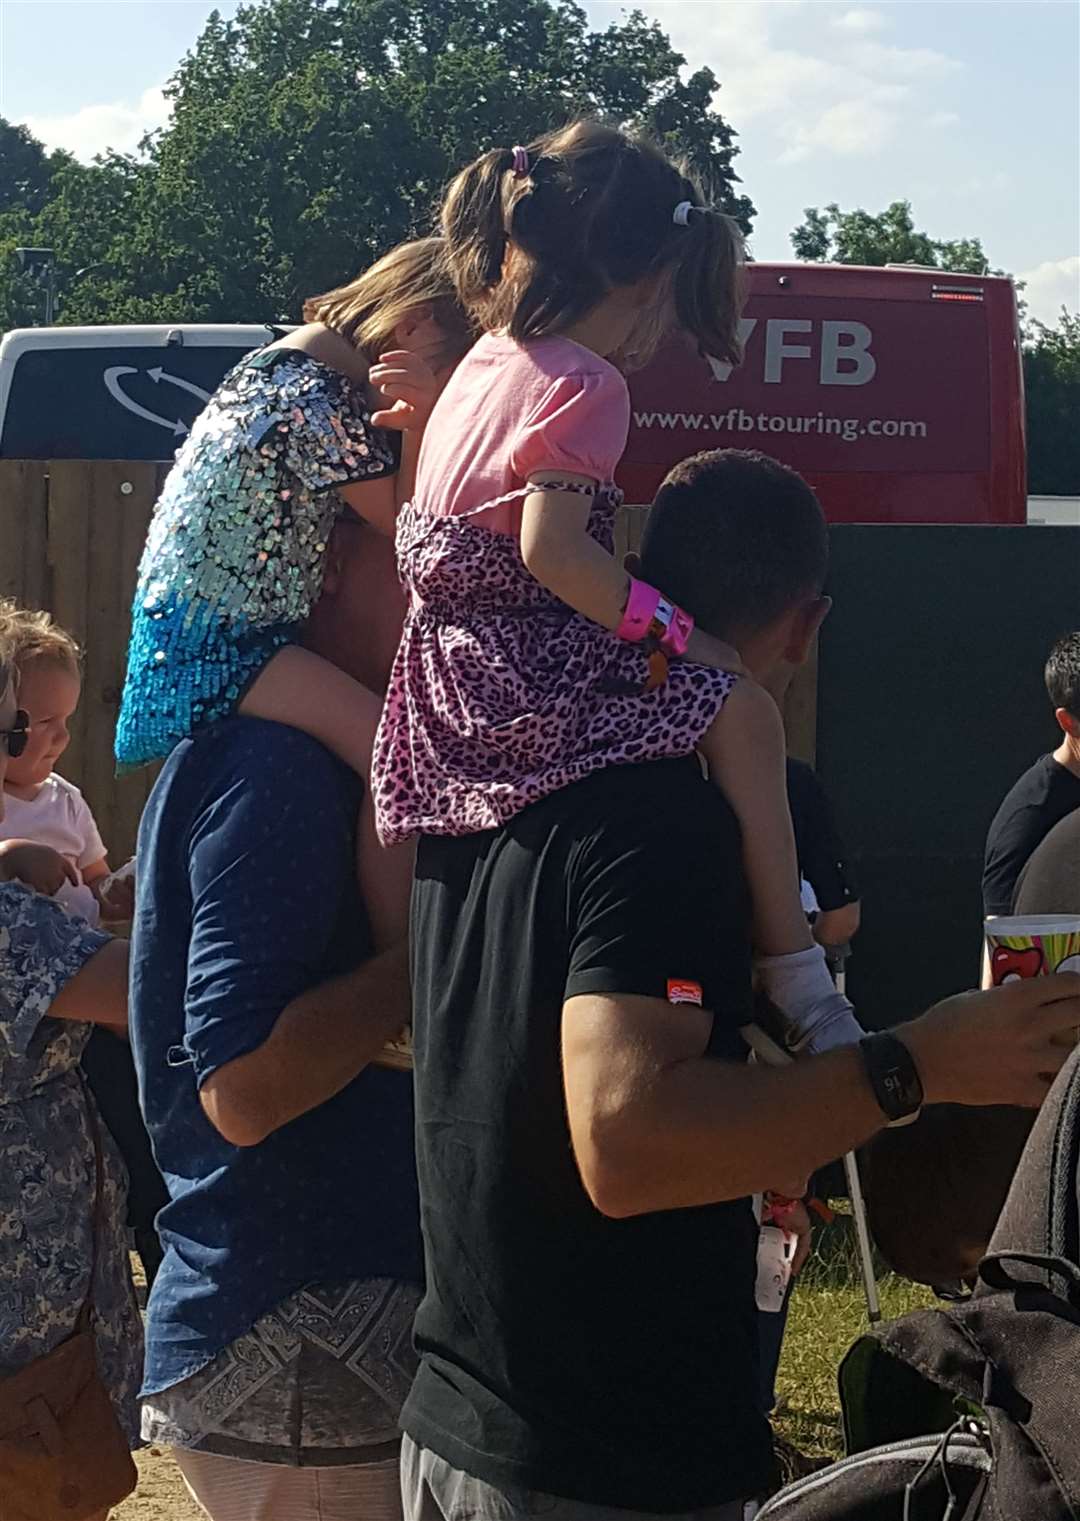 Little festivalgoers dress for the occasion and ride high on Dad's shoulders at Black Deer